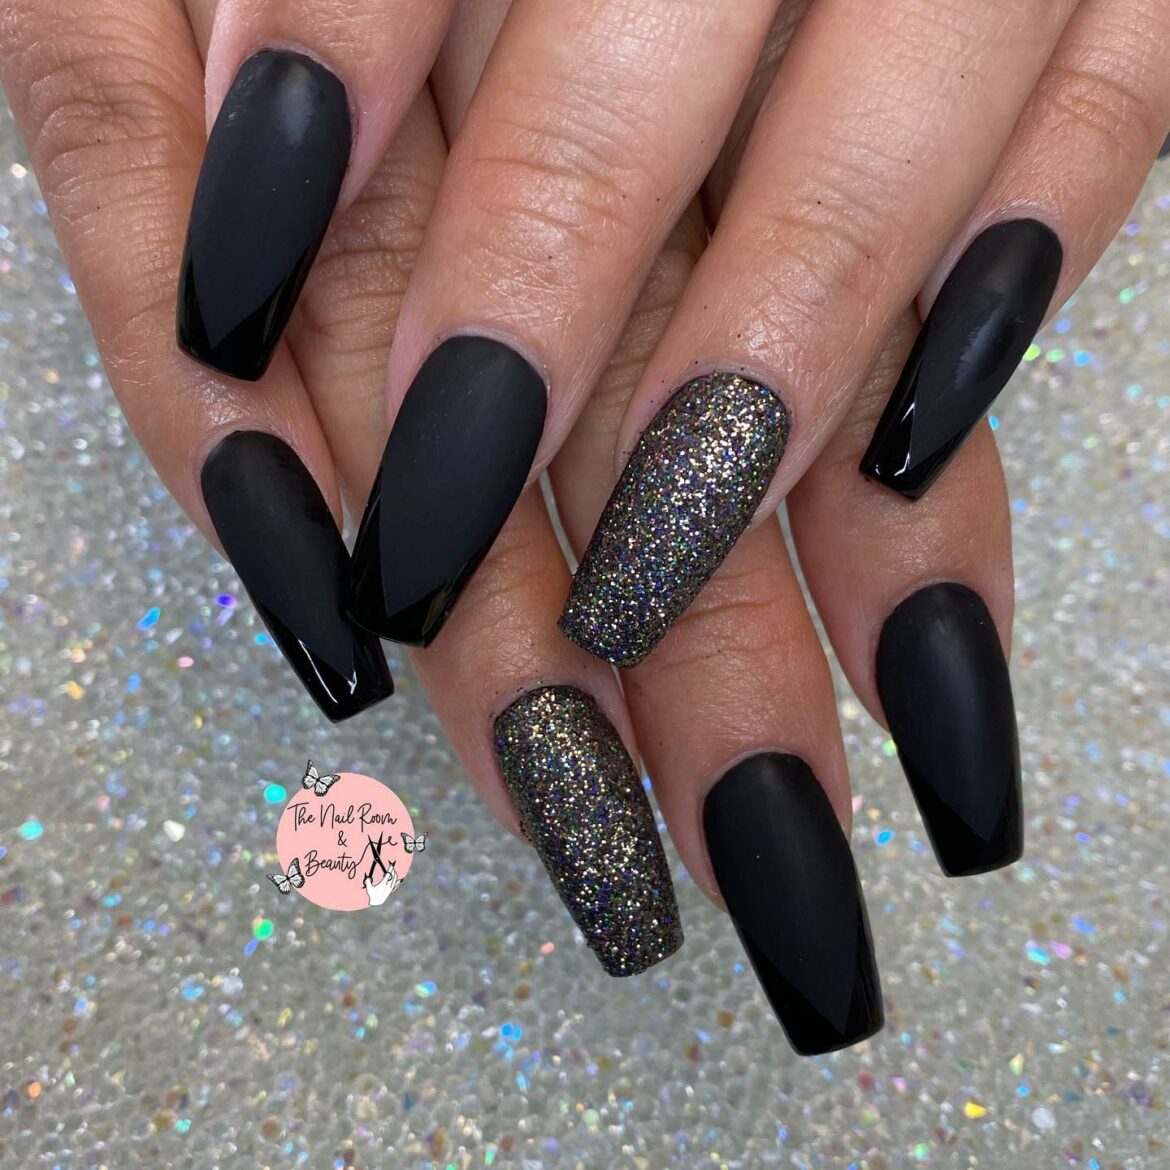 24 Latest Pretty Nail Designs To Try In 2023! - alexie